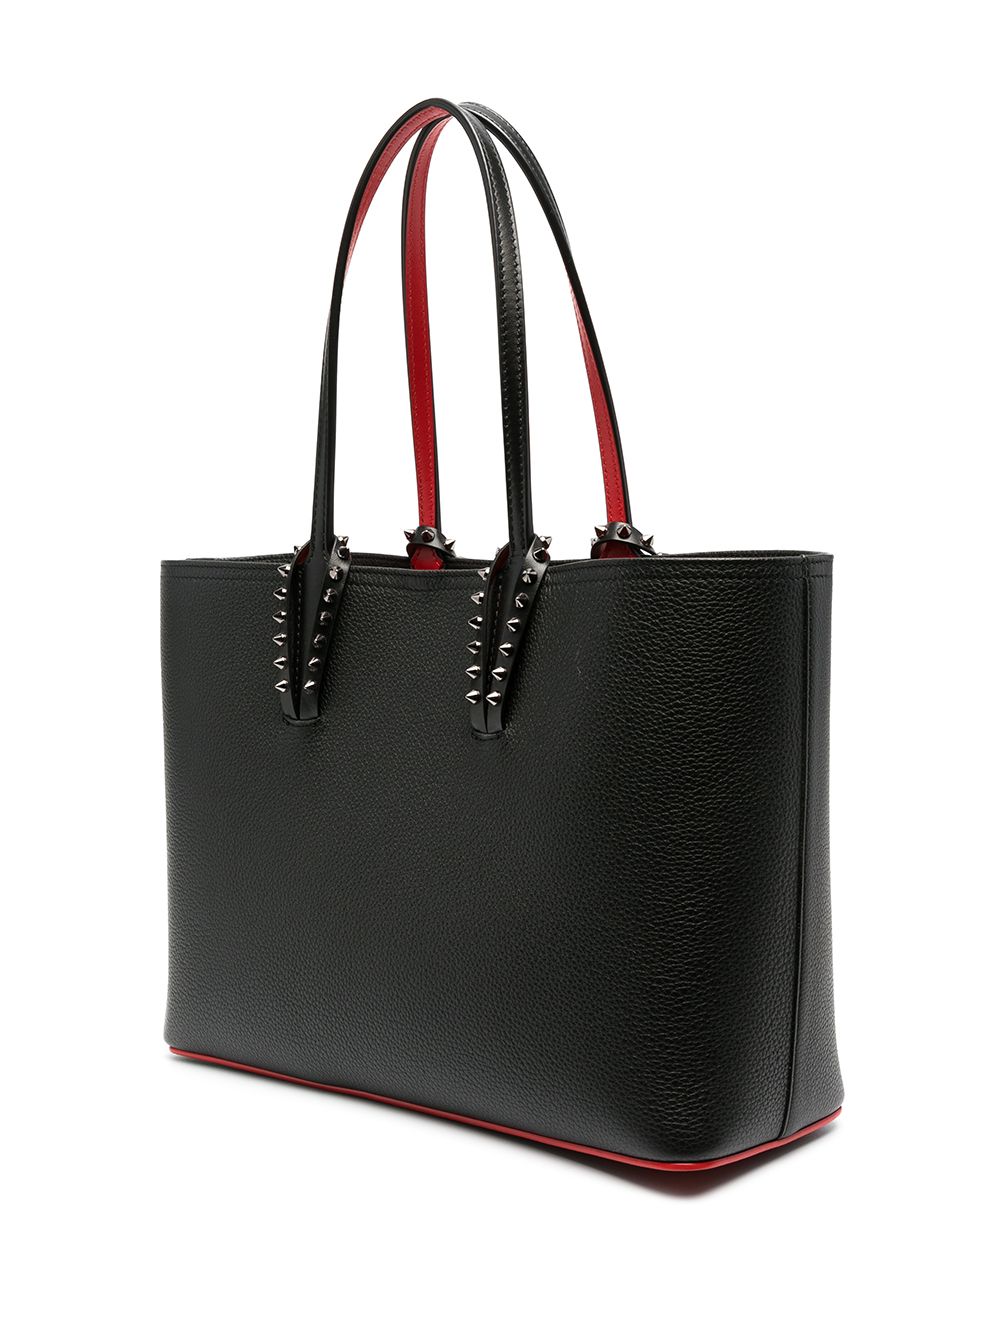 Shop Christian Louboutin Black Leather Tote Handbag With Silver Stud Embellishment And Two-tone Design